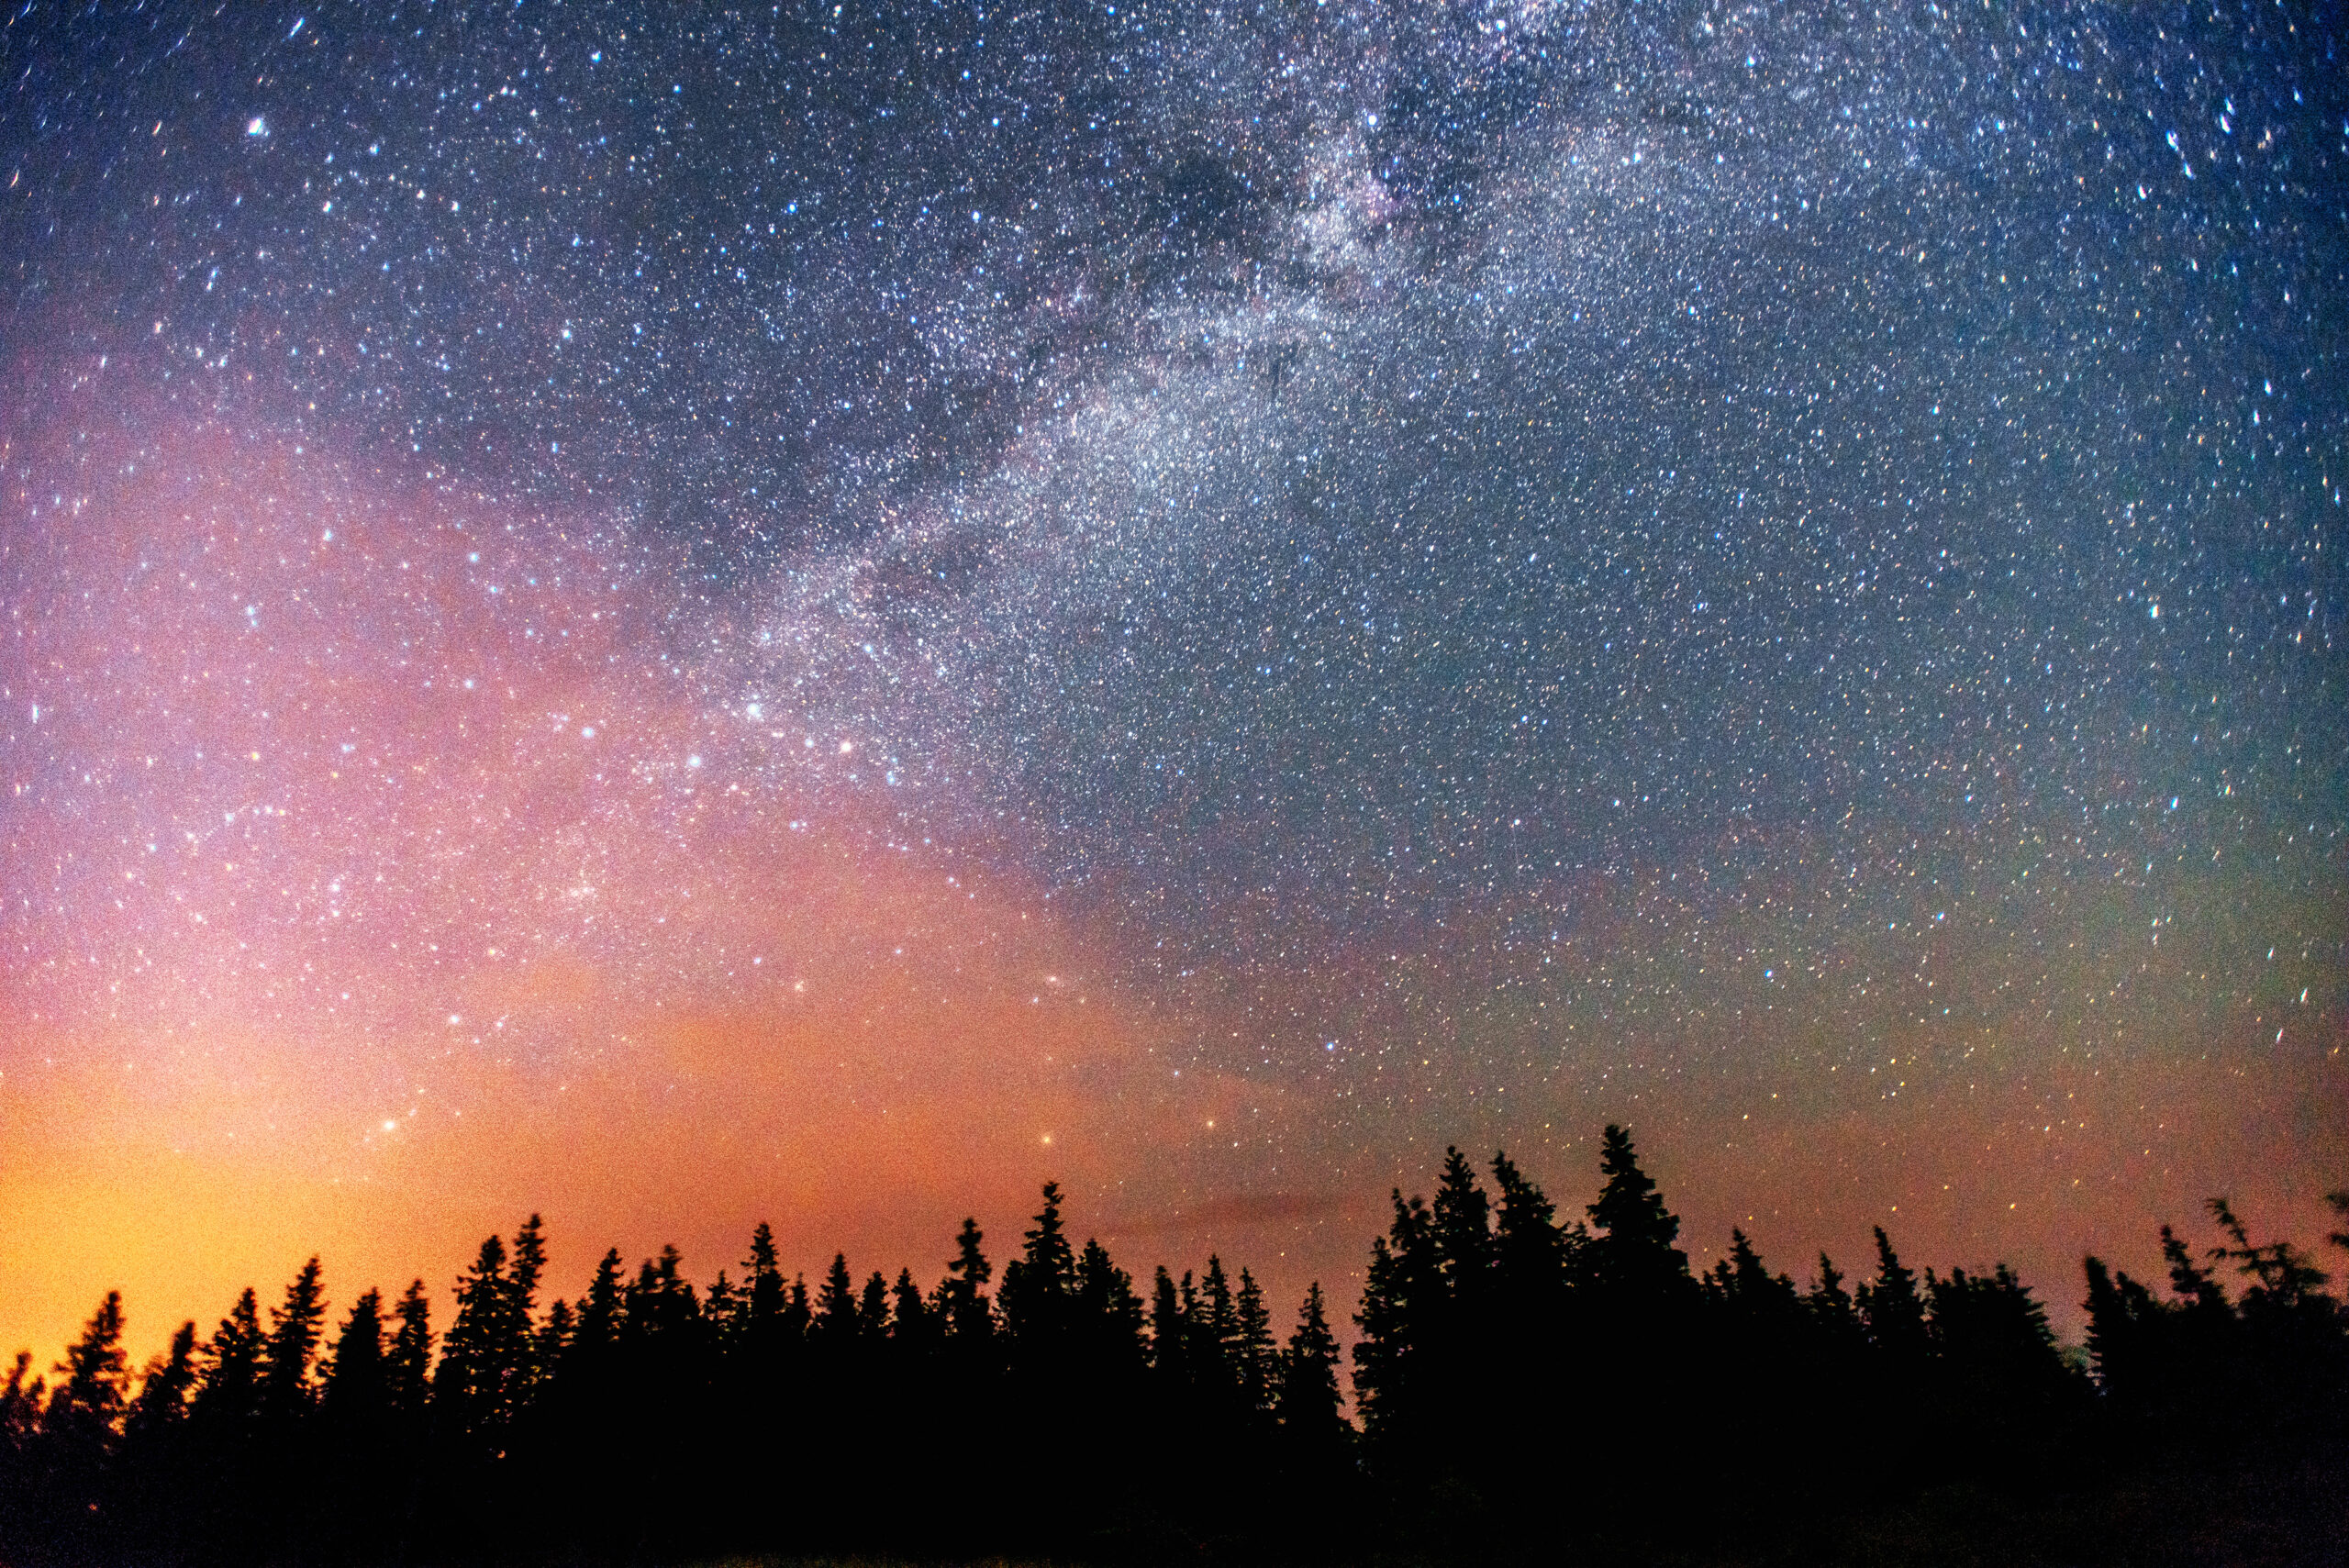 Photo of the Milky Way galaxy within a starry and colorful sky, with the silhouettes of trees in the foreground.